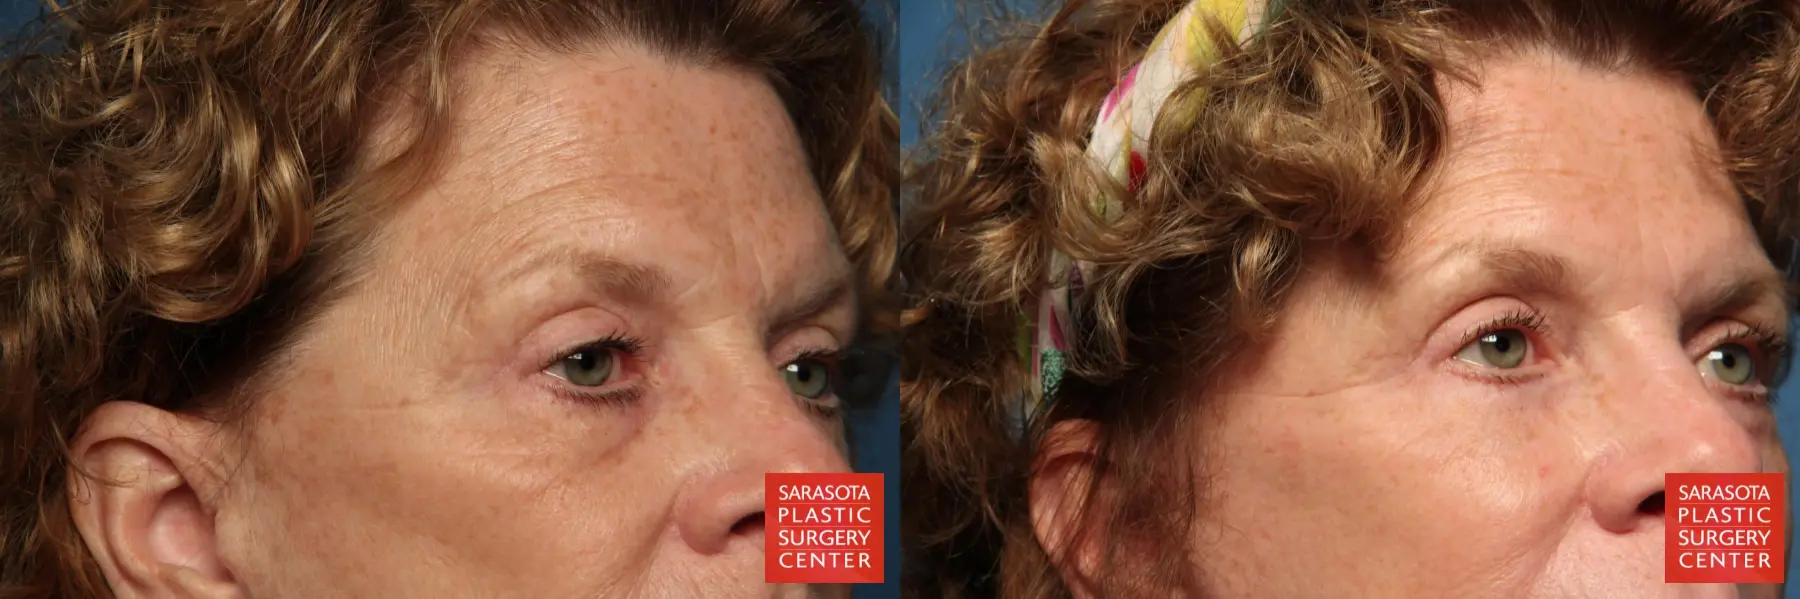 Eyelid Lift: Patient 25 - Before and After 2